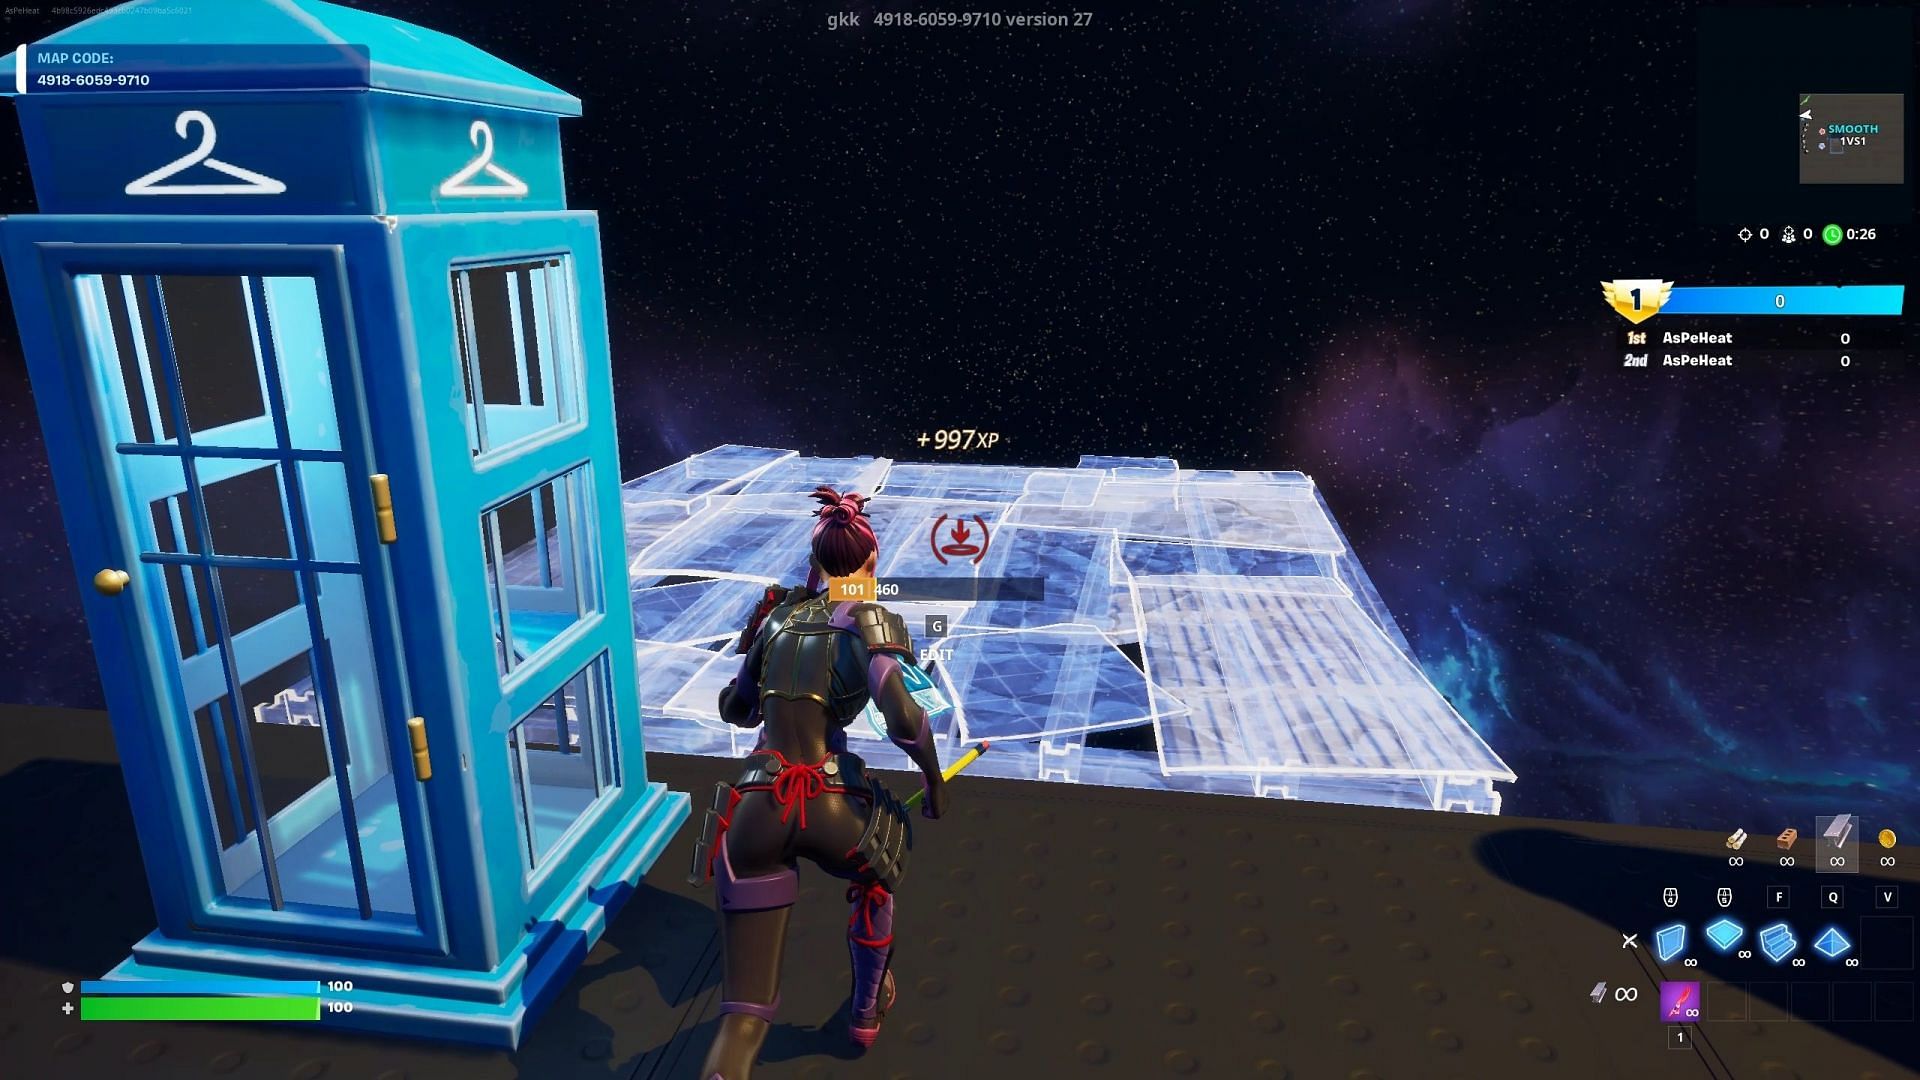 To get the most out of the XP glitch, build floors behind the telephone booth (Image via Epic Games)